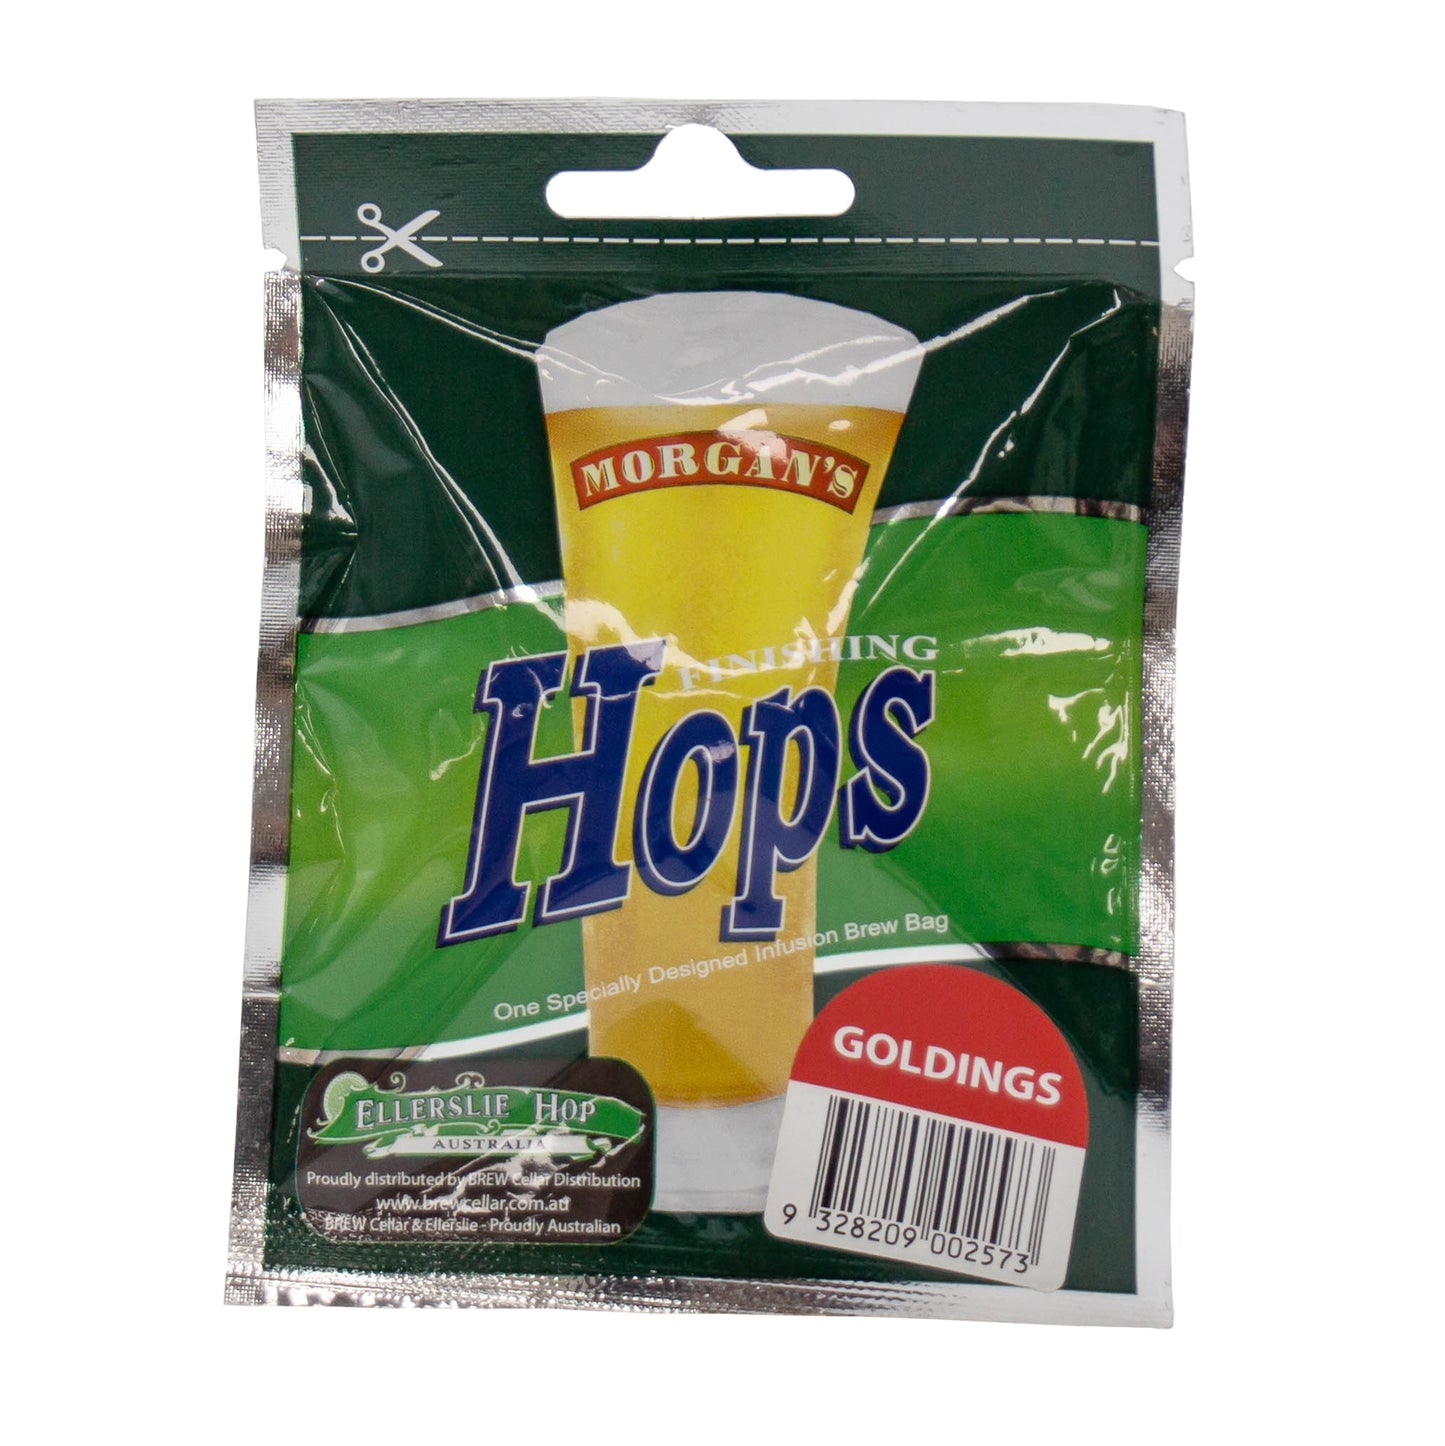 12g packet of Goldings Hops for home brewing